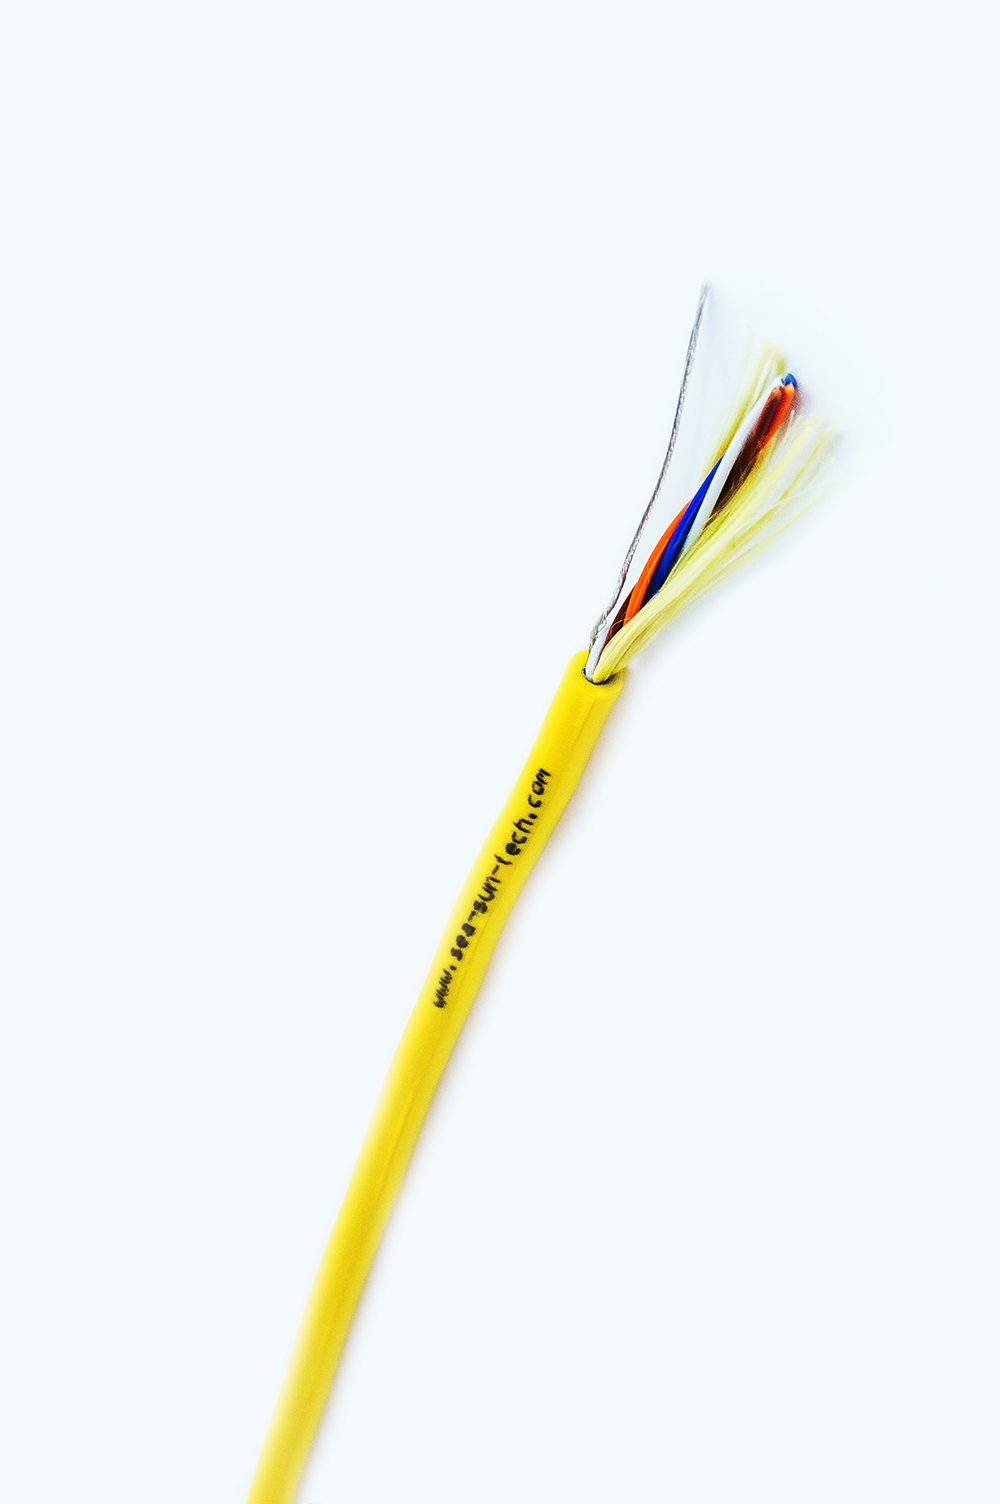 Kevlar multi conductor cable with shielding - Sea & Sun Technology